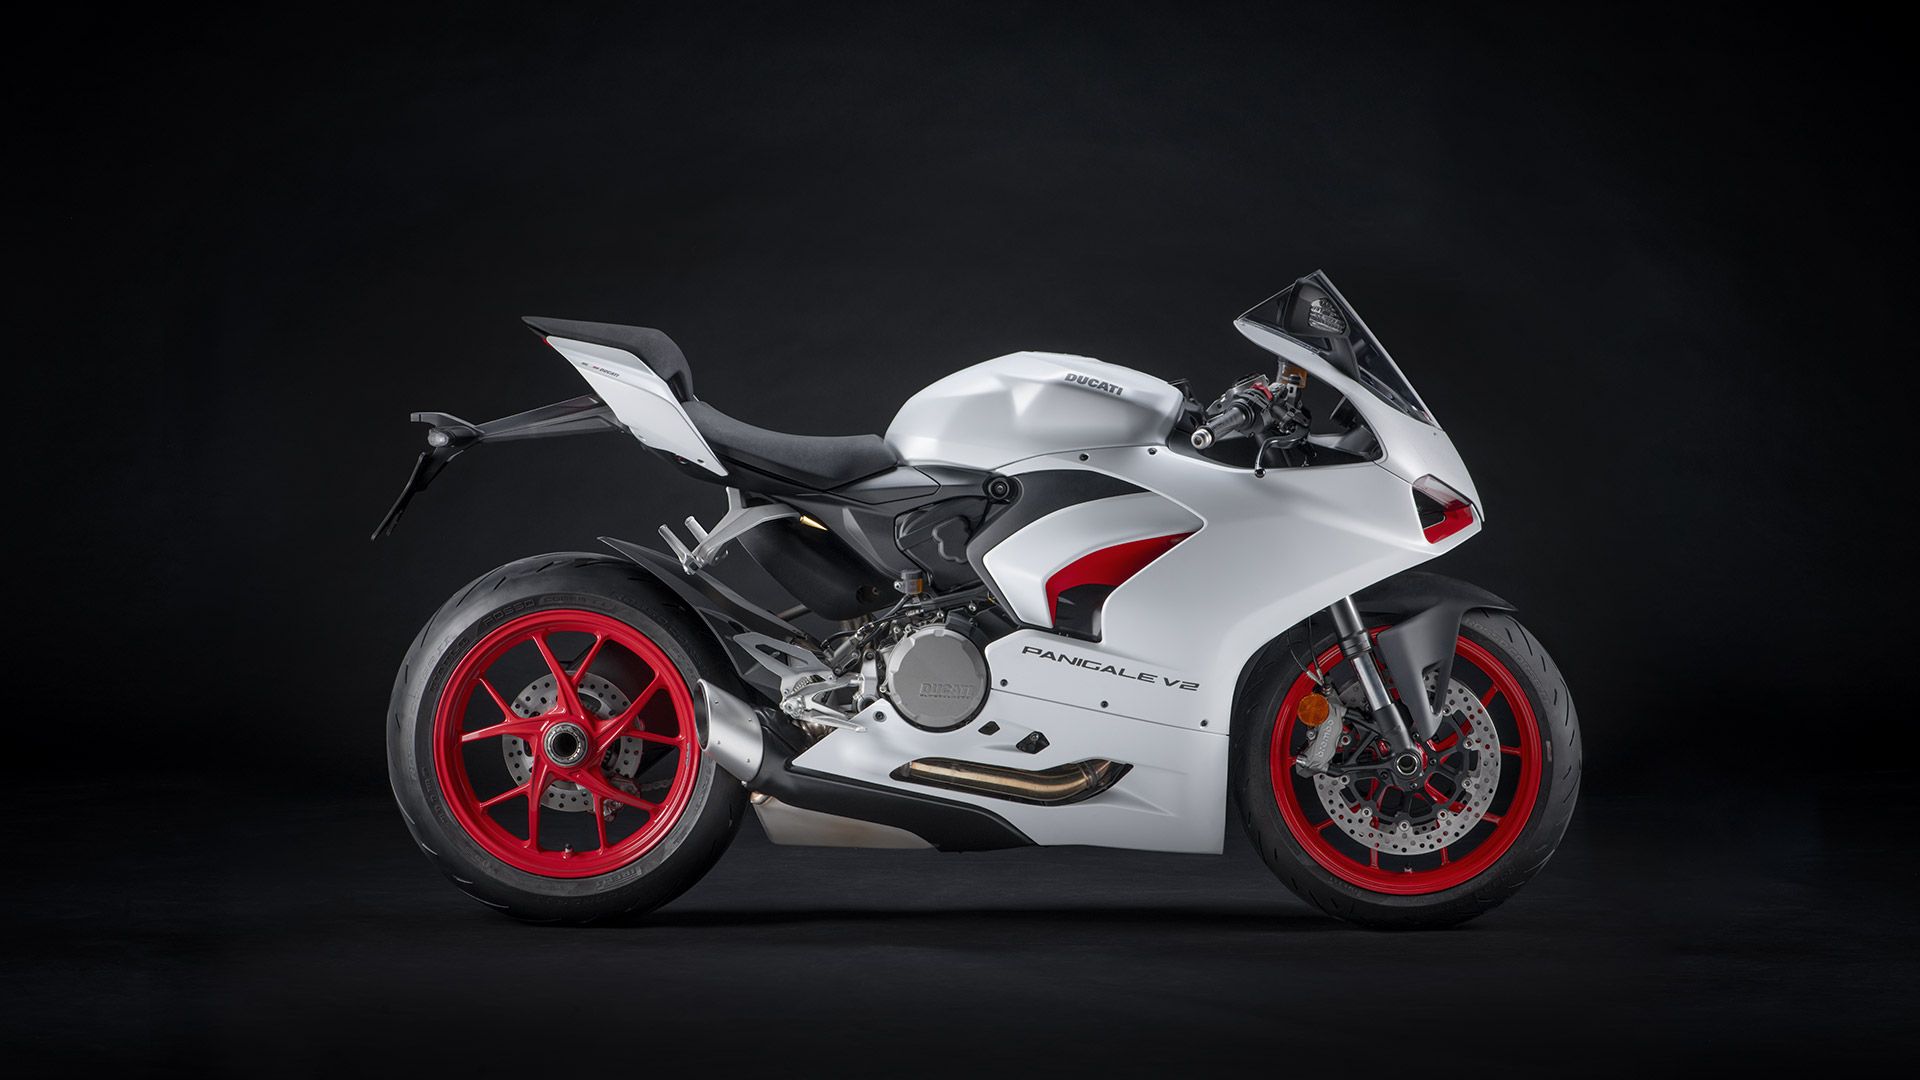 The Red Essence. In white: new livery for the Ducati Panigale V2